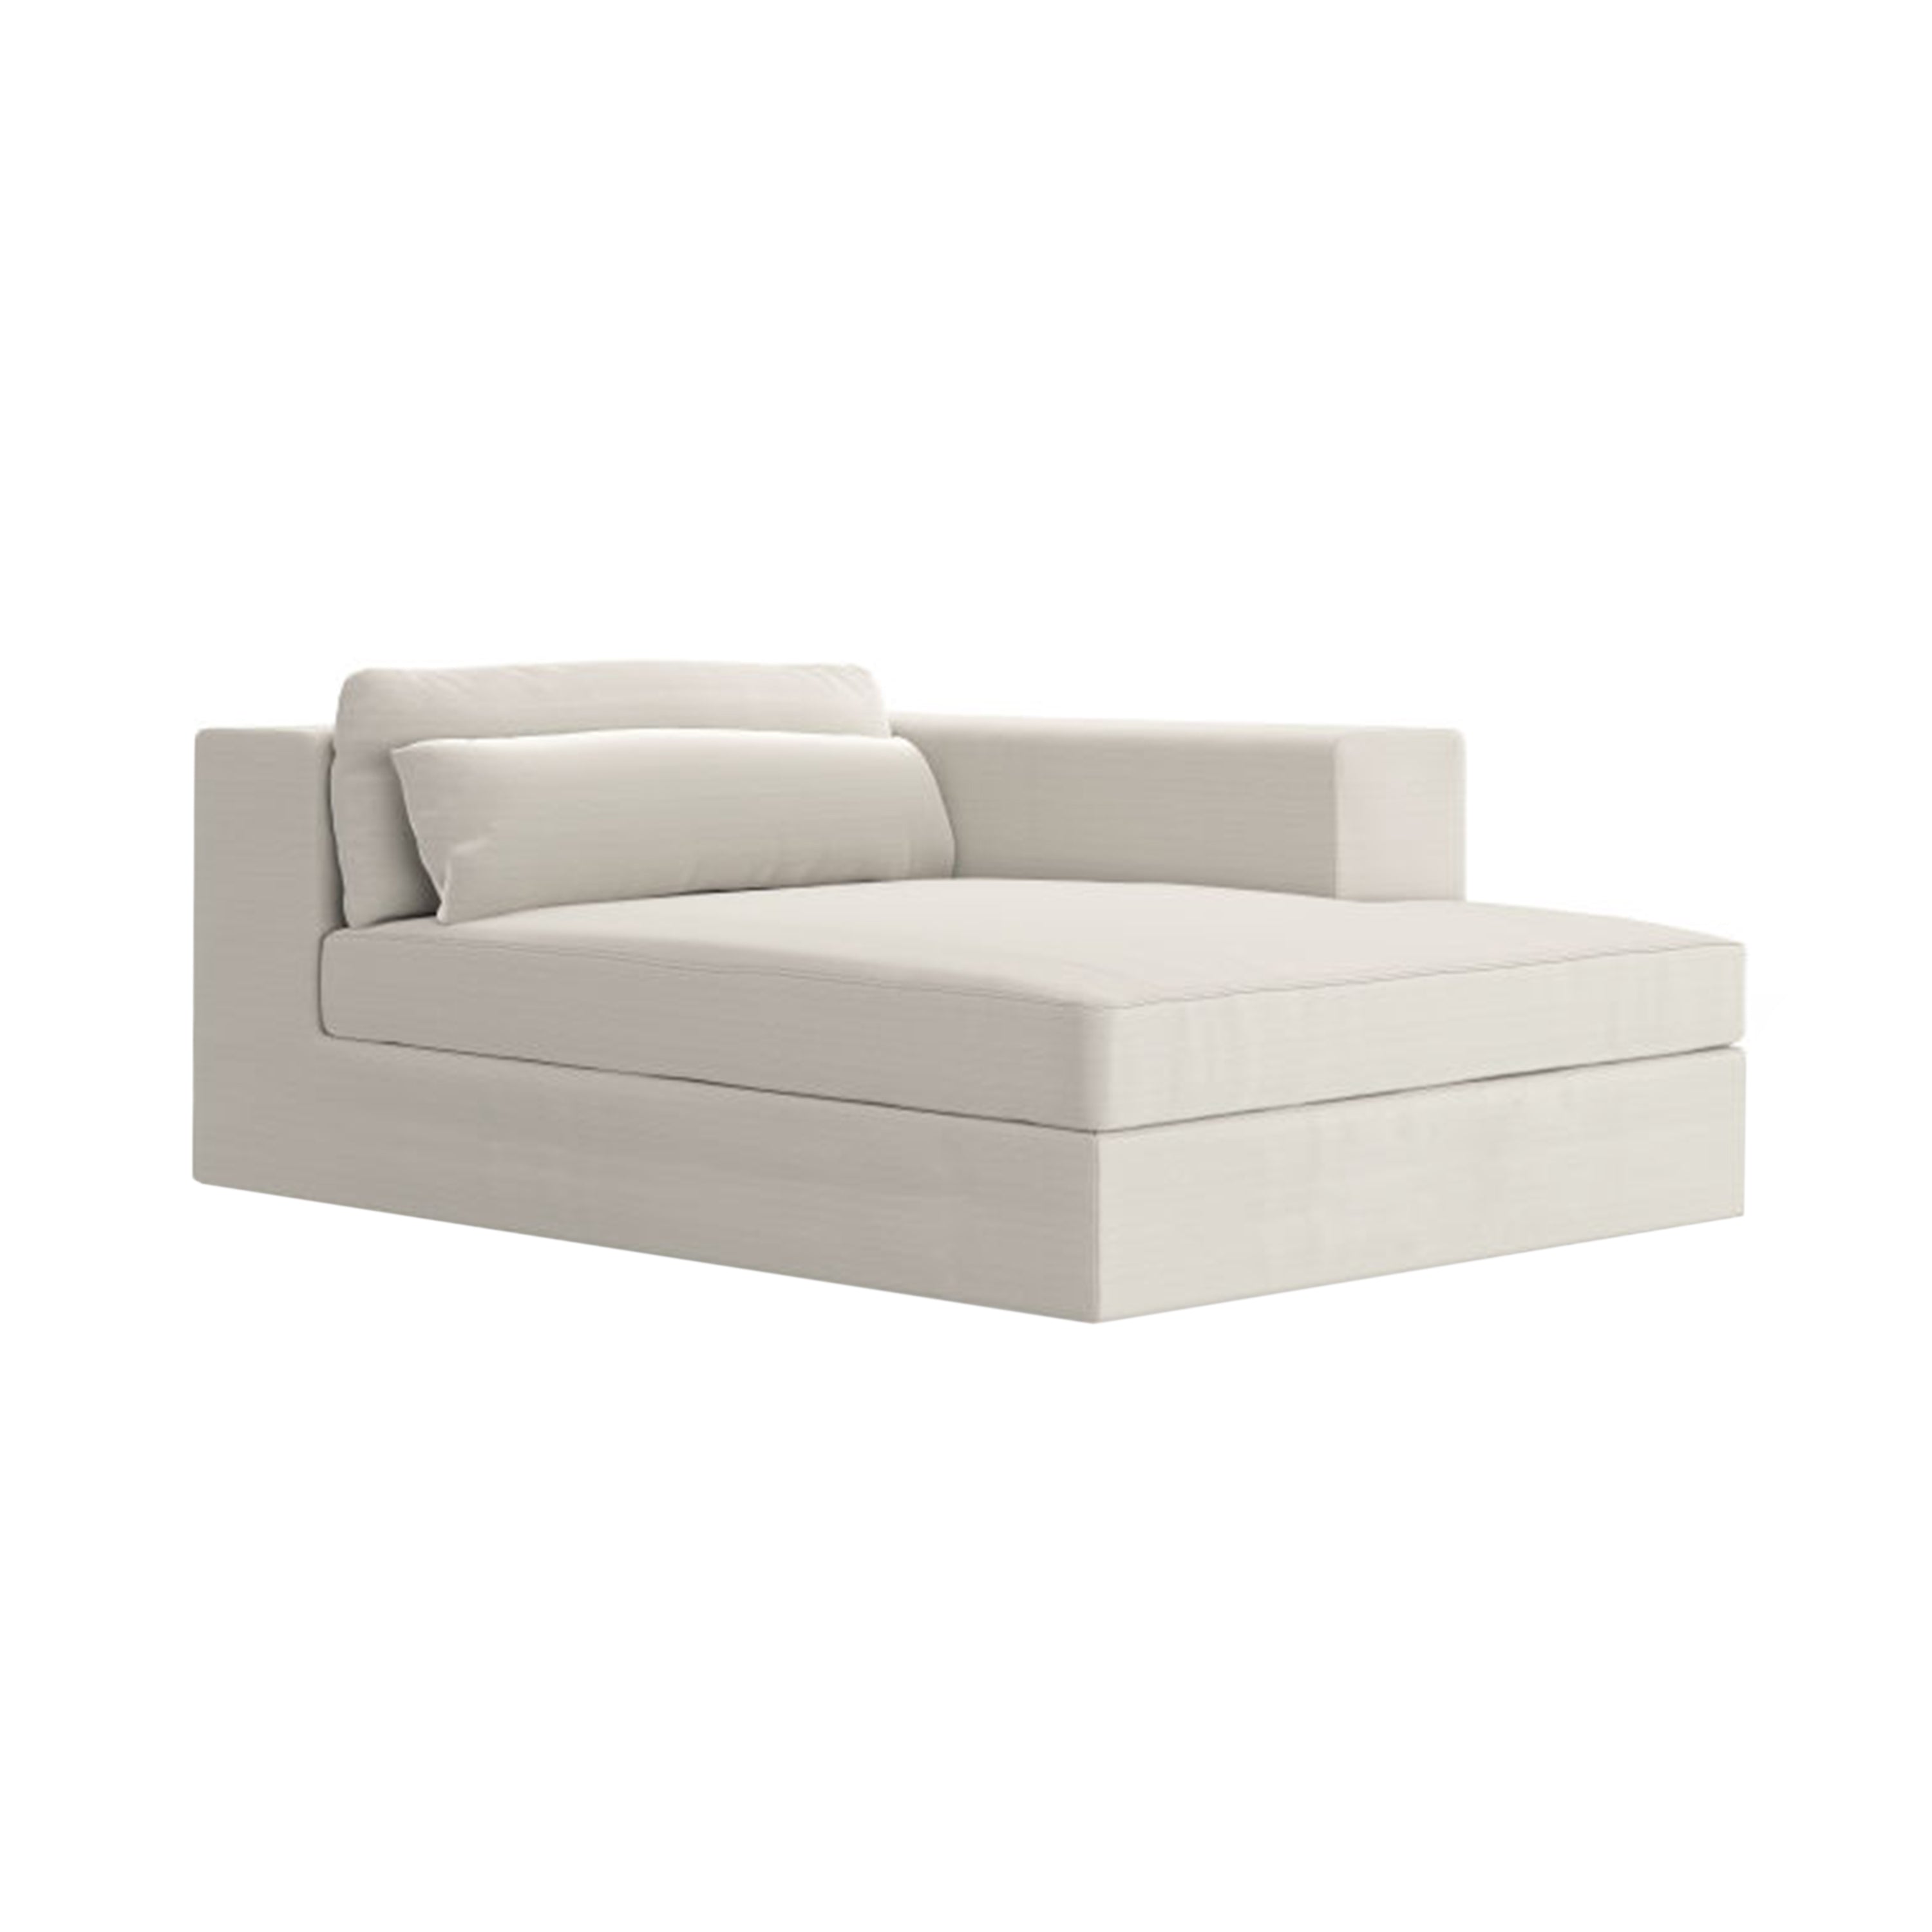 Atelier Sofa Modules: Chaise Lounge - Right + With Skirt